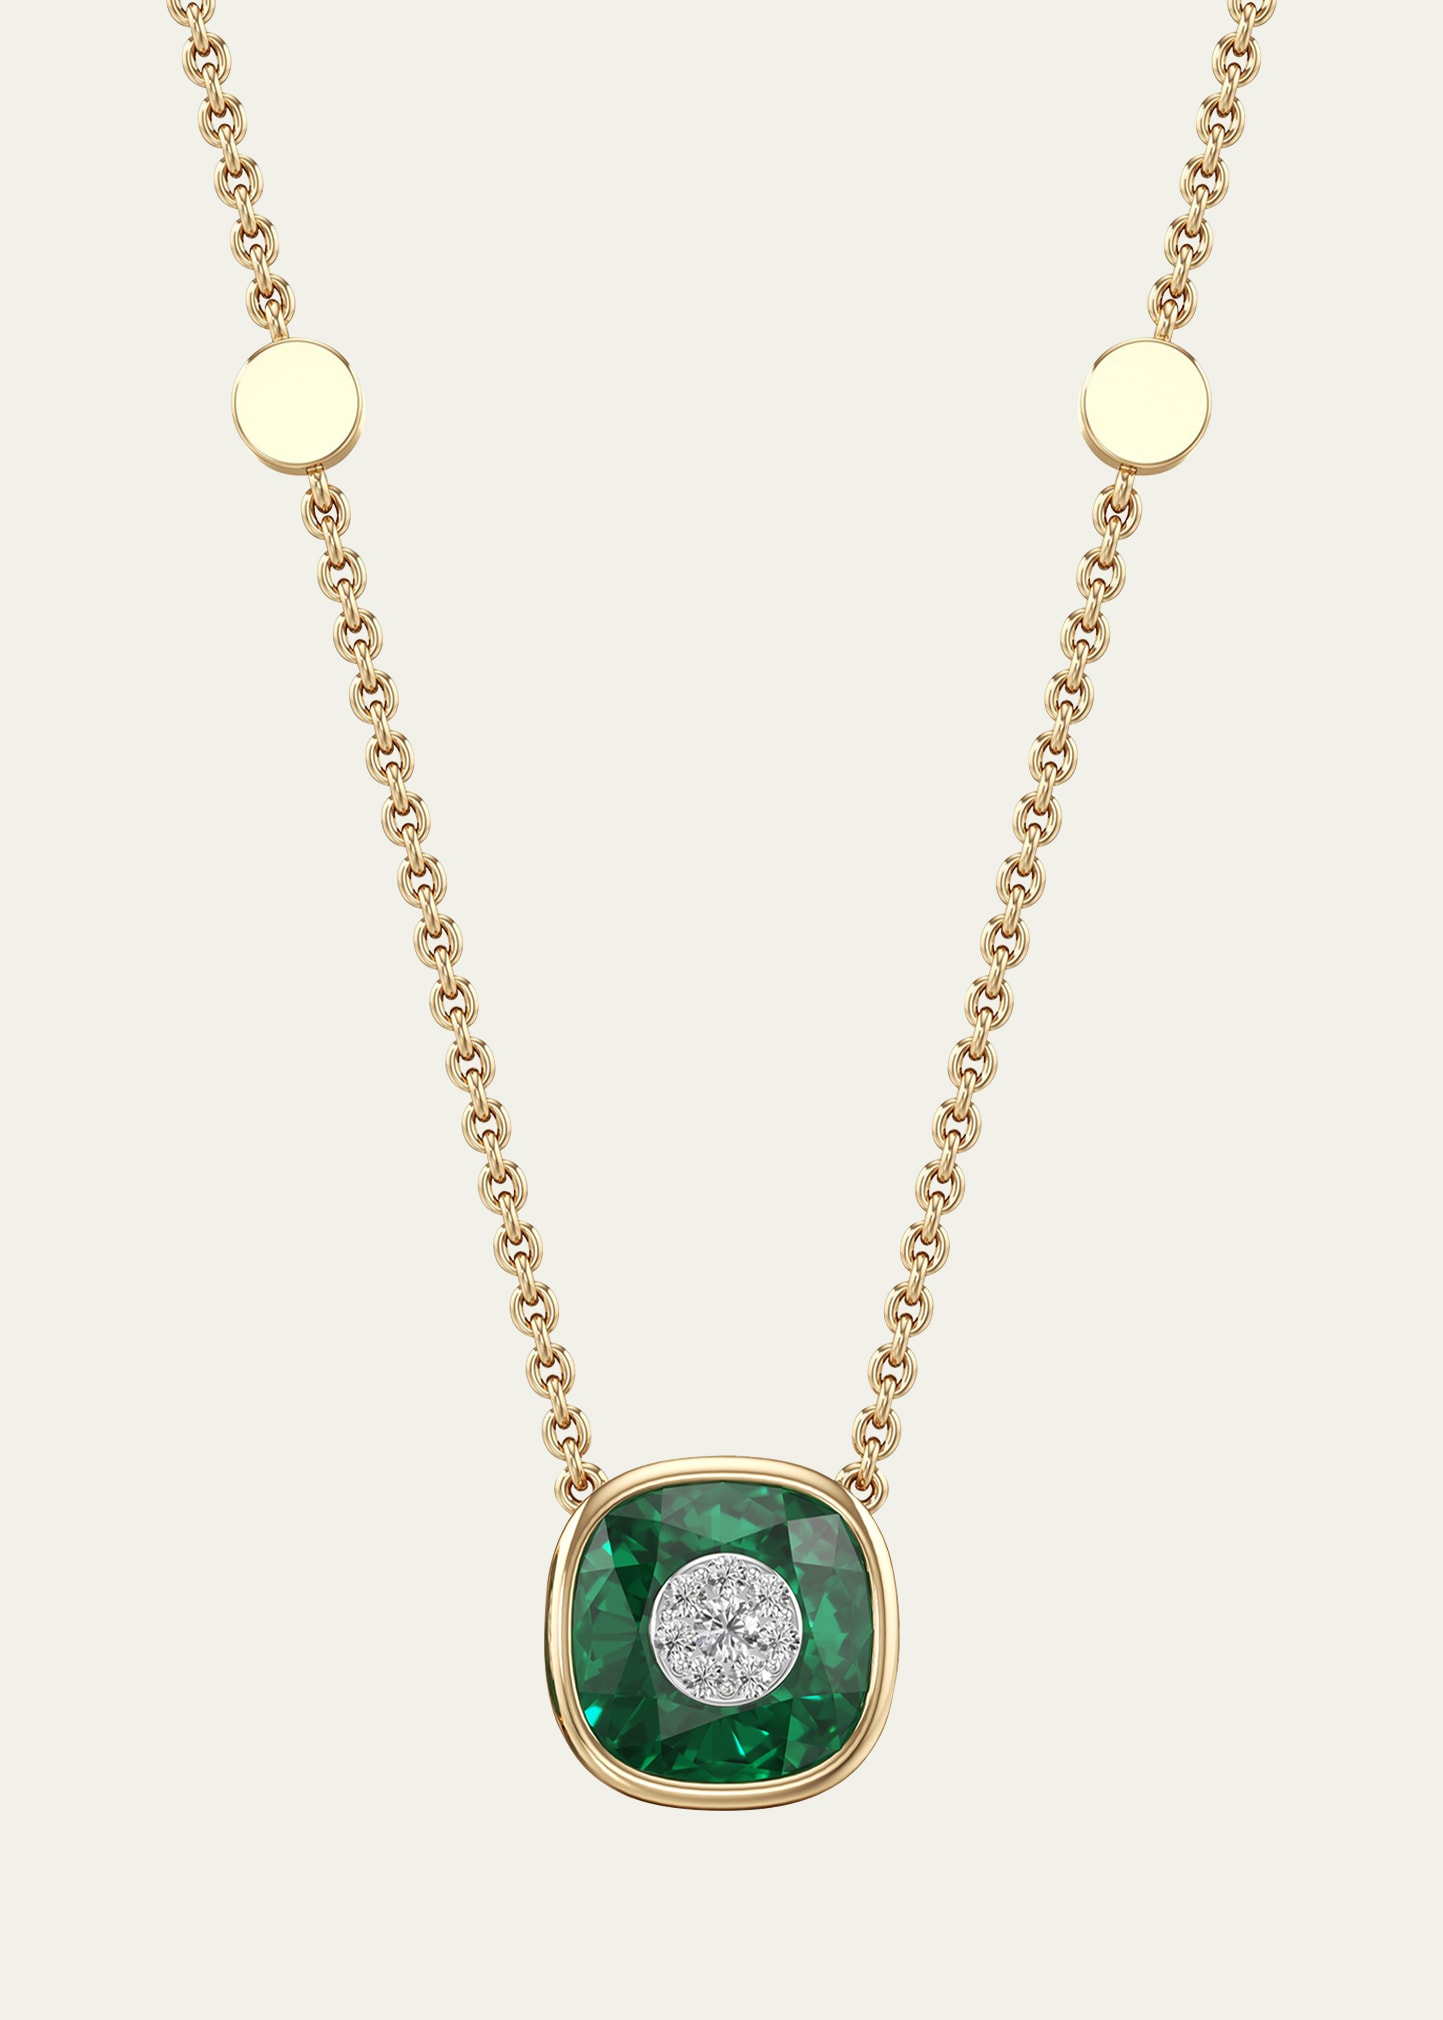 Bhansali One Collection 10mm Cushion Pendant Necklace with Yellow Gold Bezel, Emerald